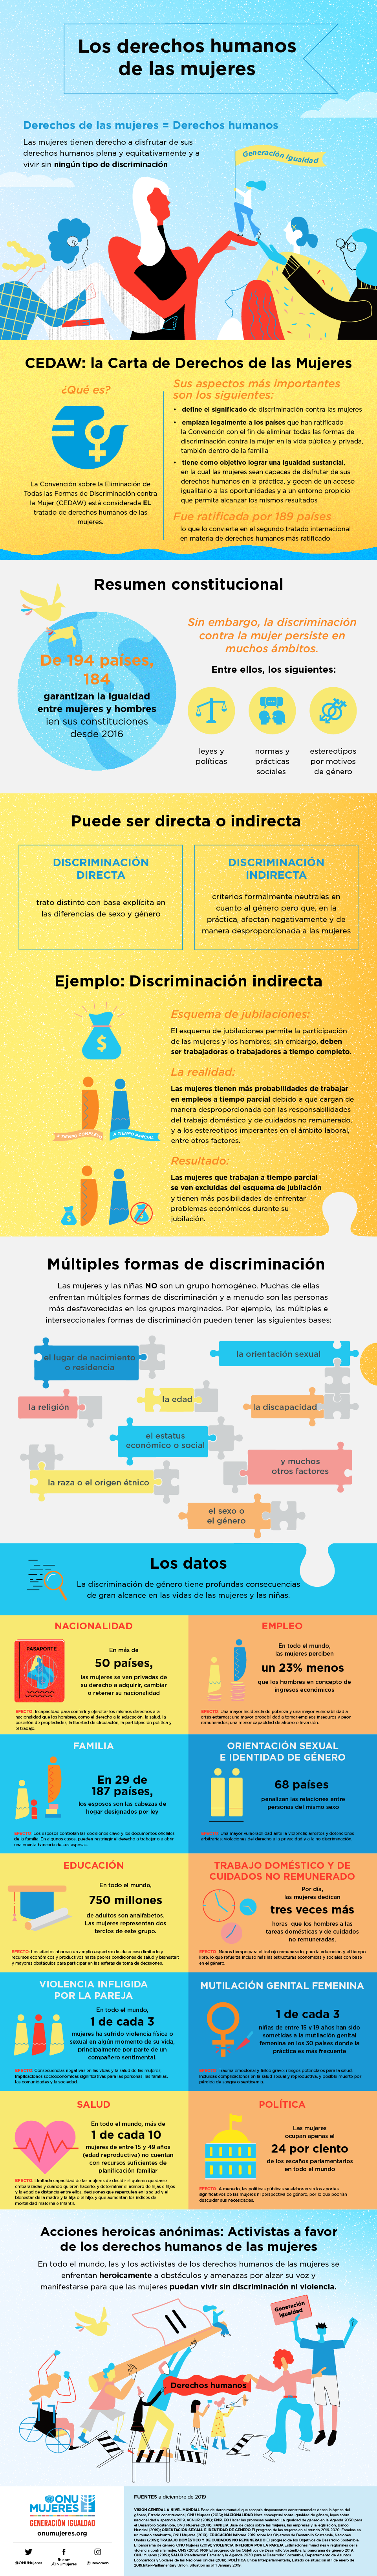 infographic-human-rights-es (1)